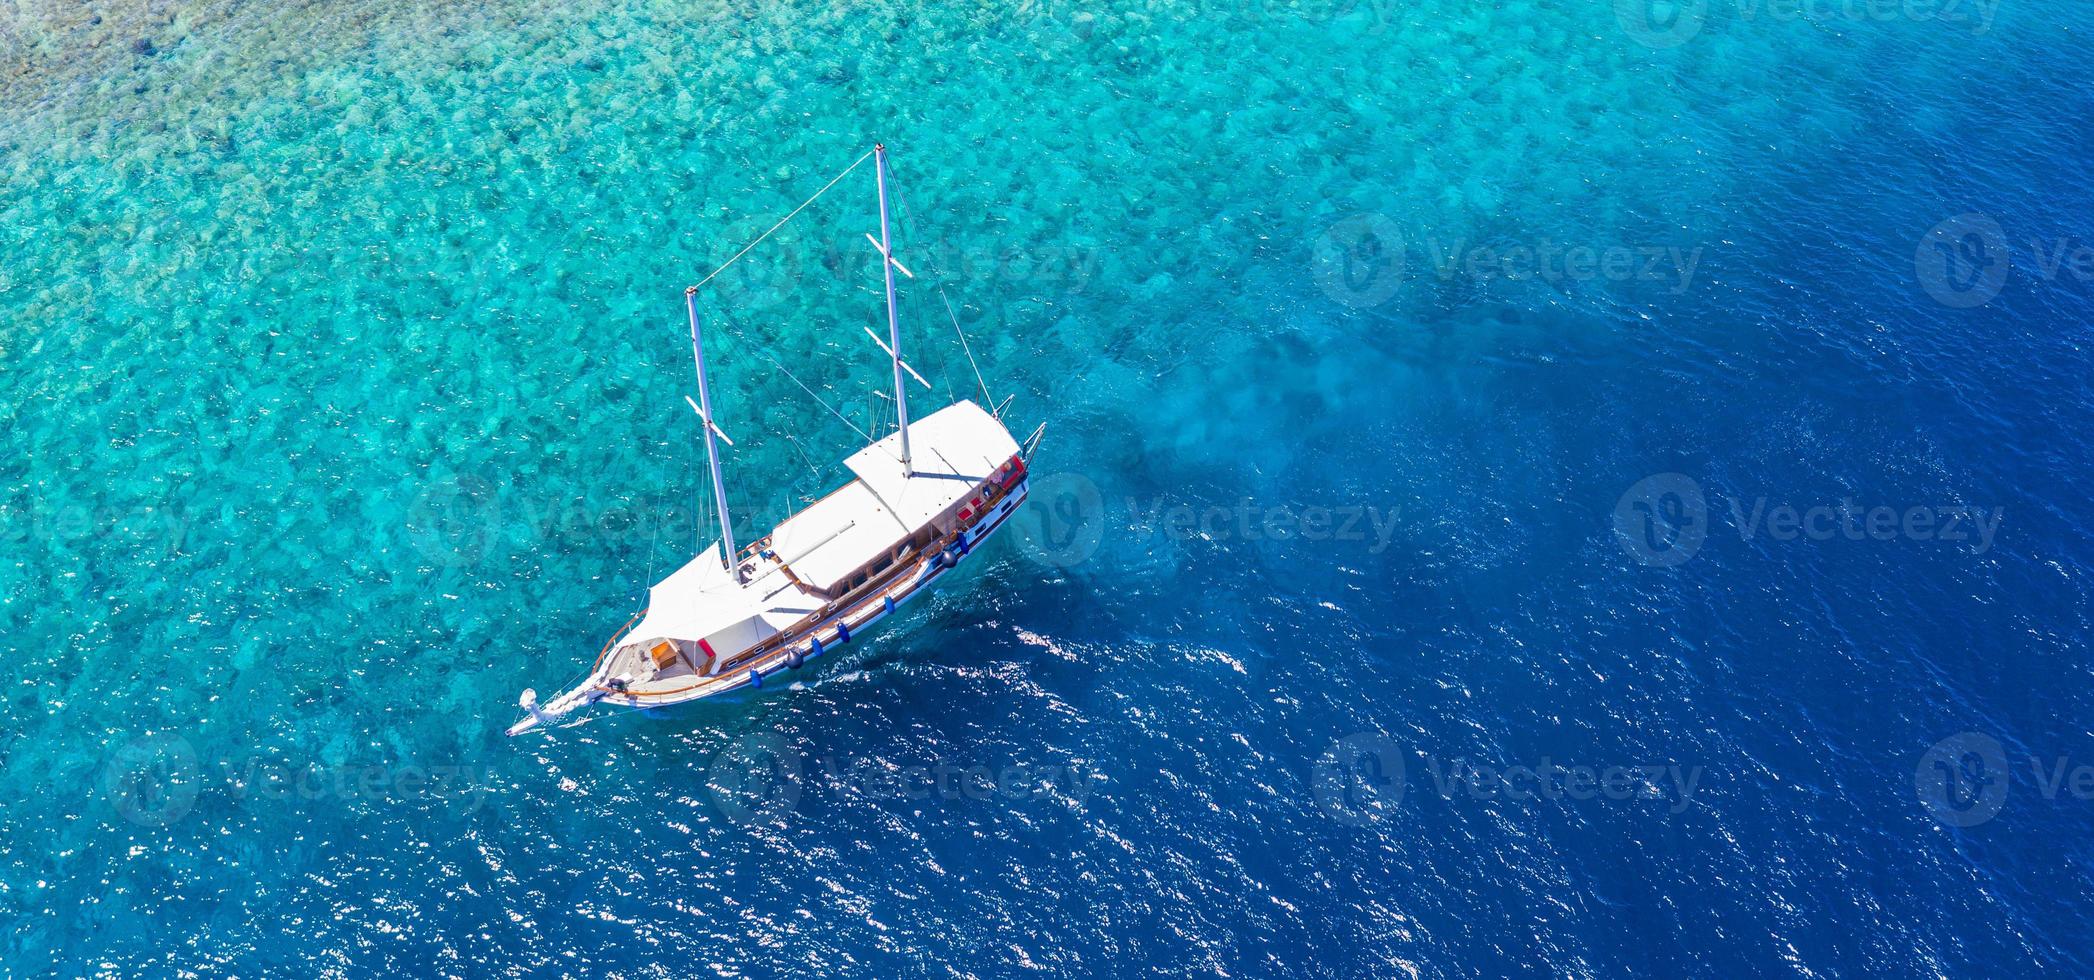 Yacht anchoring in crystal clear turquoise water in front of the tropical island, recreational lifestyle, snorkeling. Aerial view of yacht at anchor on turquoise water, luxury activity, Maldives tour photo